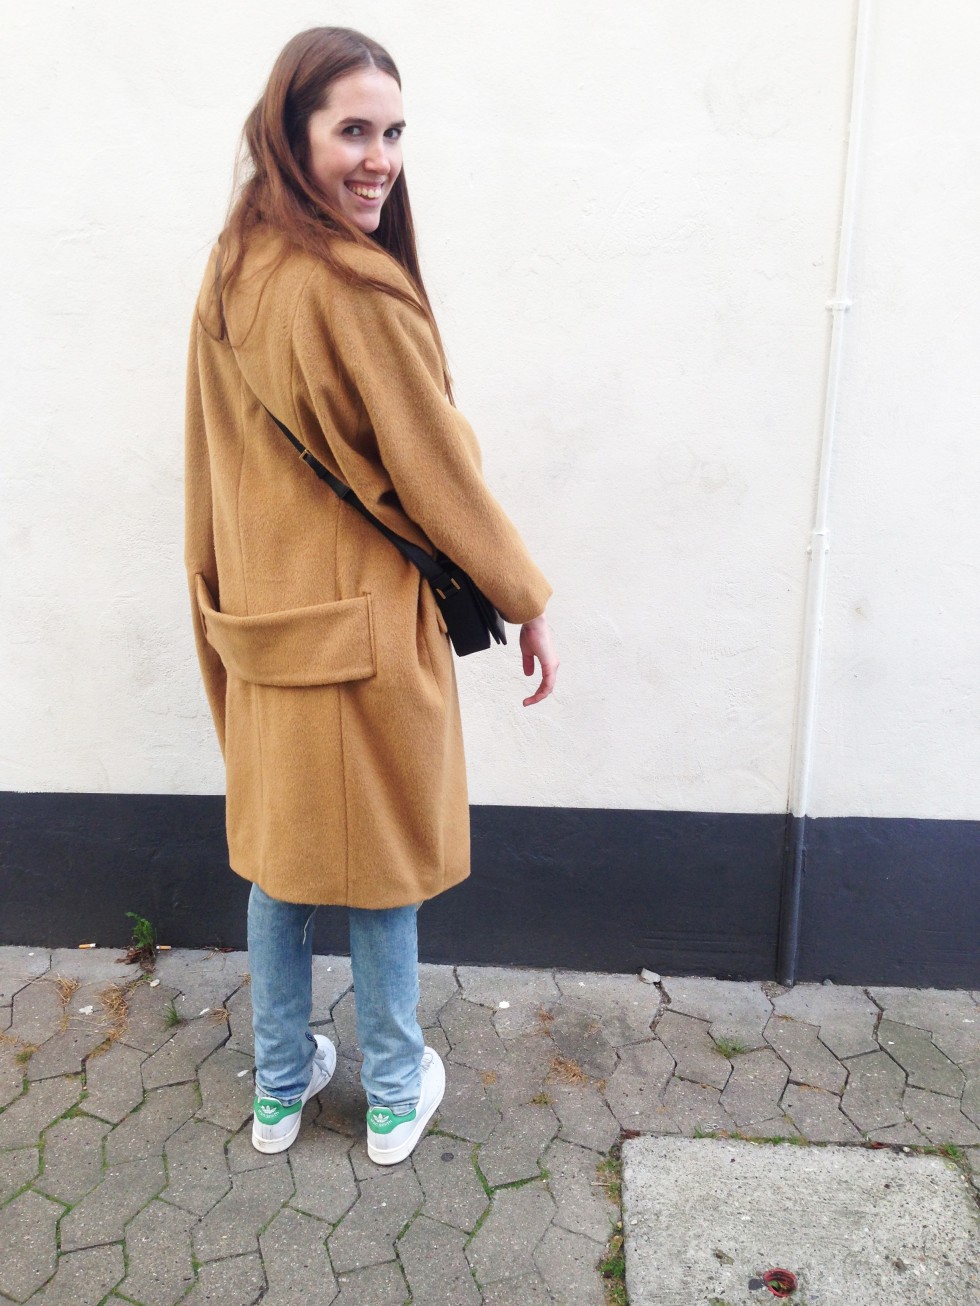 New in – Carin Wester “Babel” coat | Look of the day | Mindyourmakeup blog